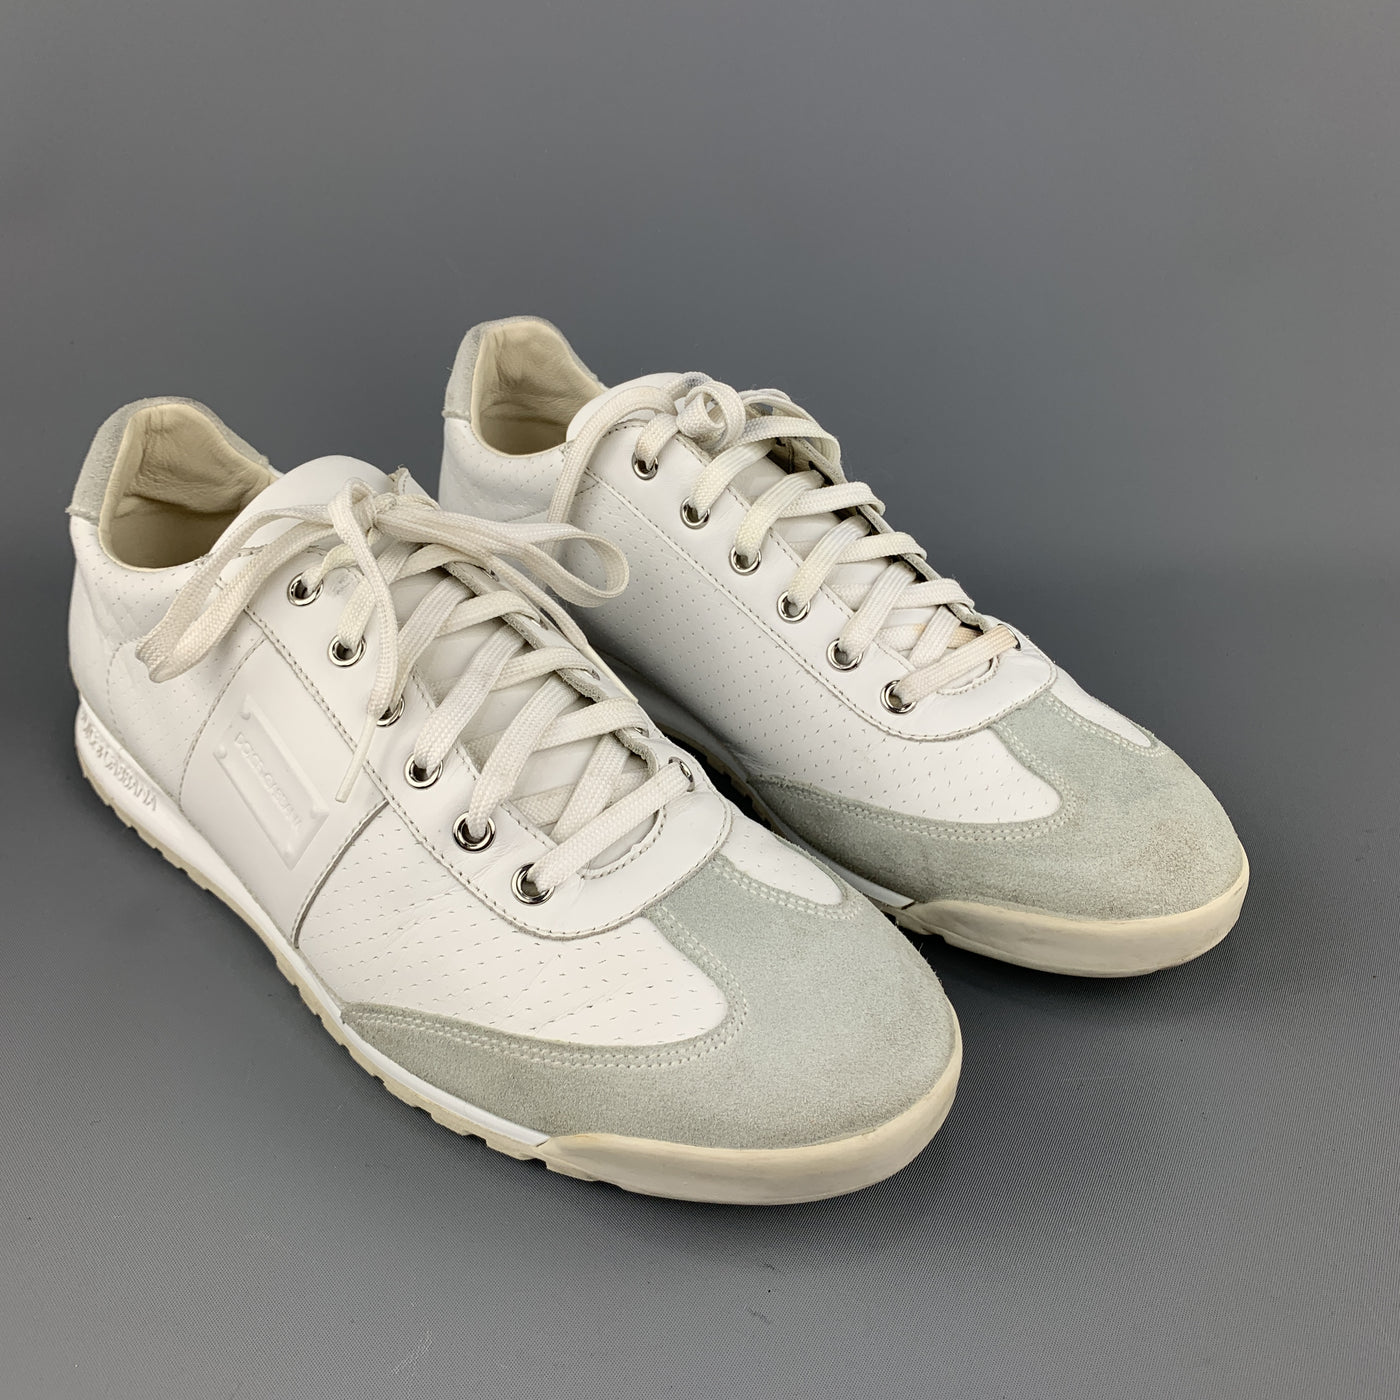 DOLCE & GABBANA Size 9 White Leather & Gray Suede Lace Up Sneakers